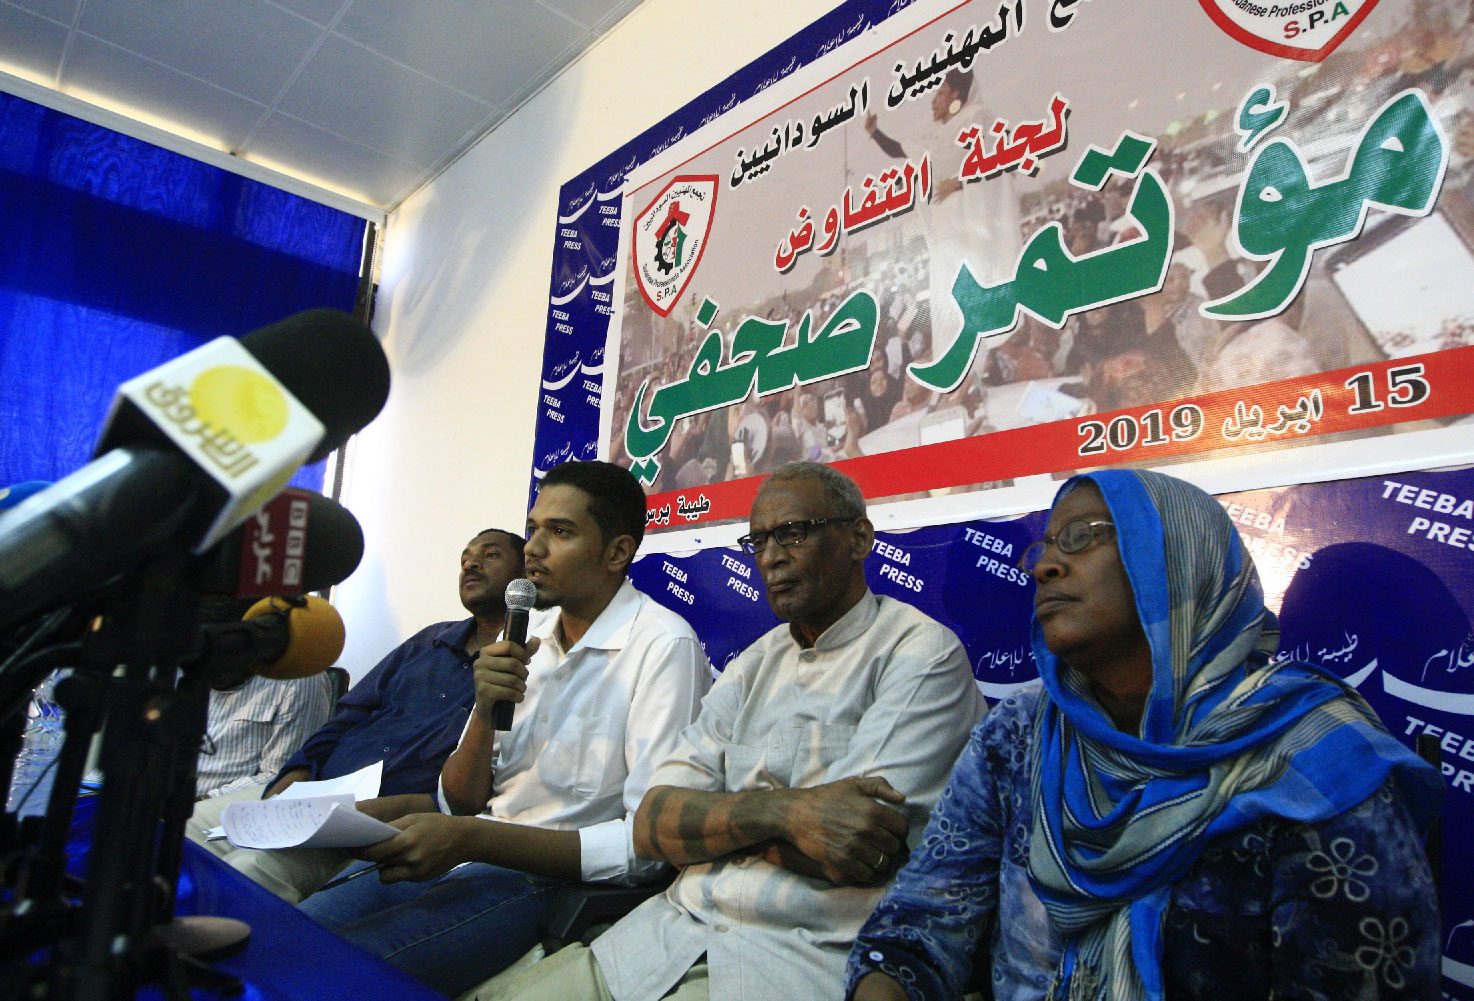 Members of the Sudanese Professionals Association give a press conference in the capital Khartoum